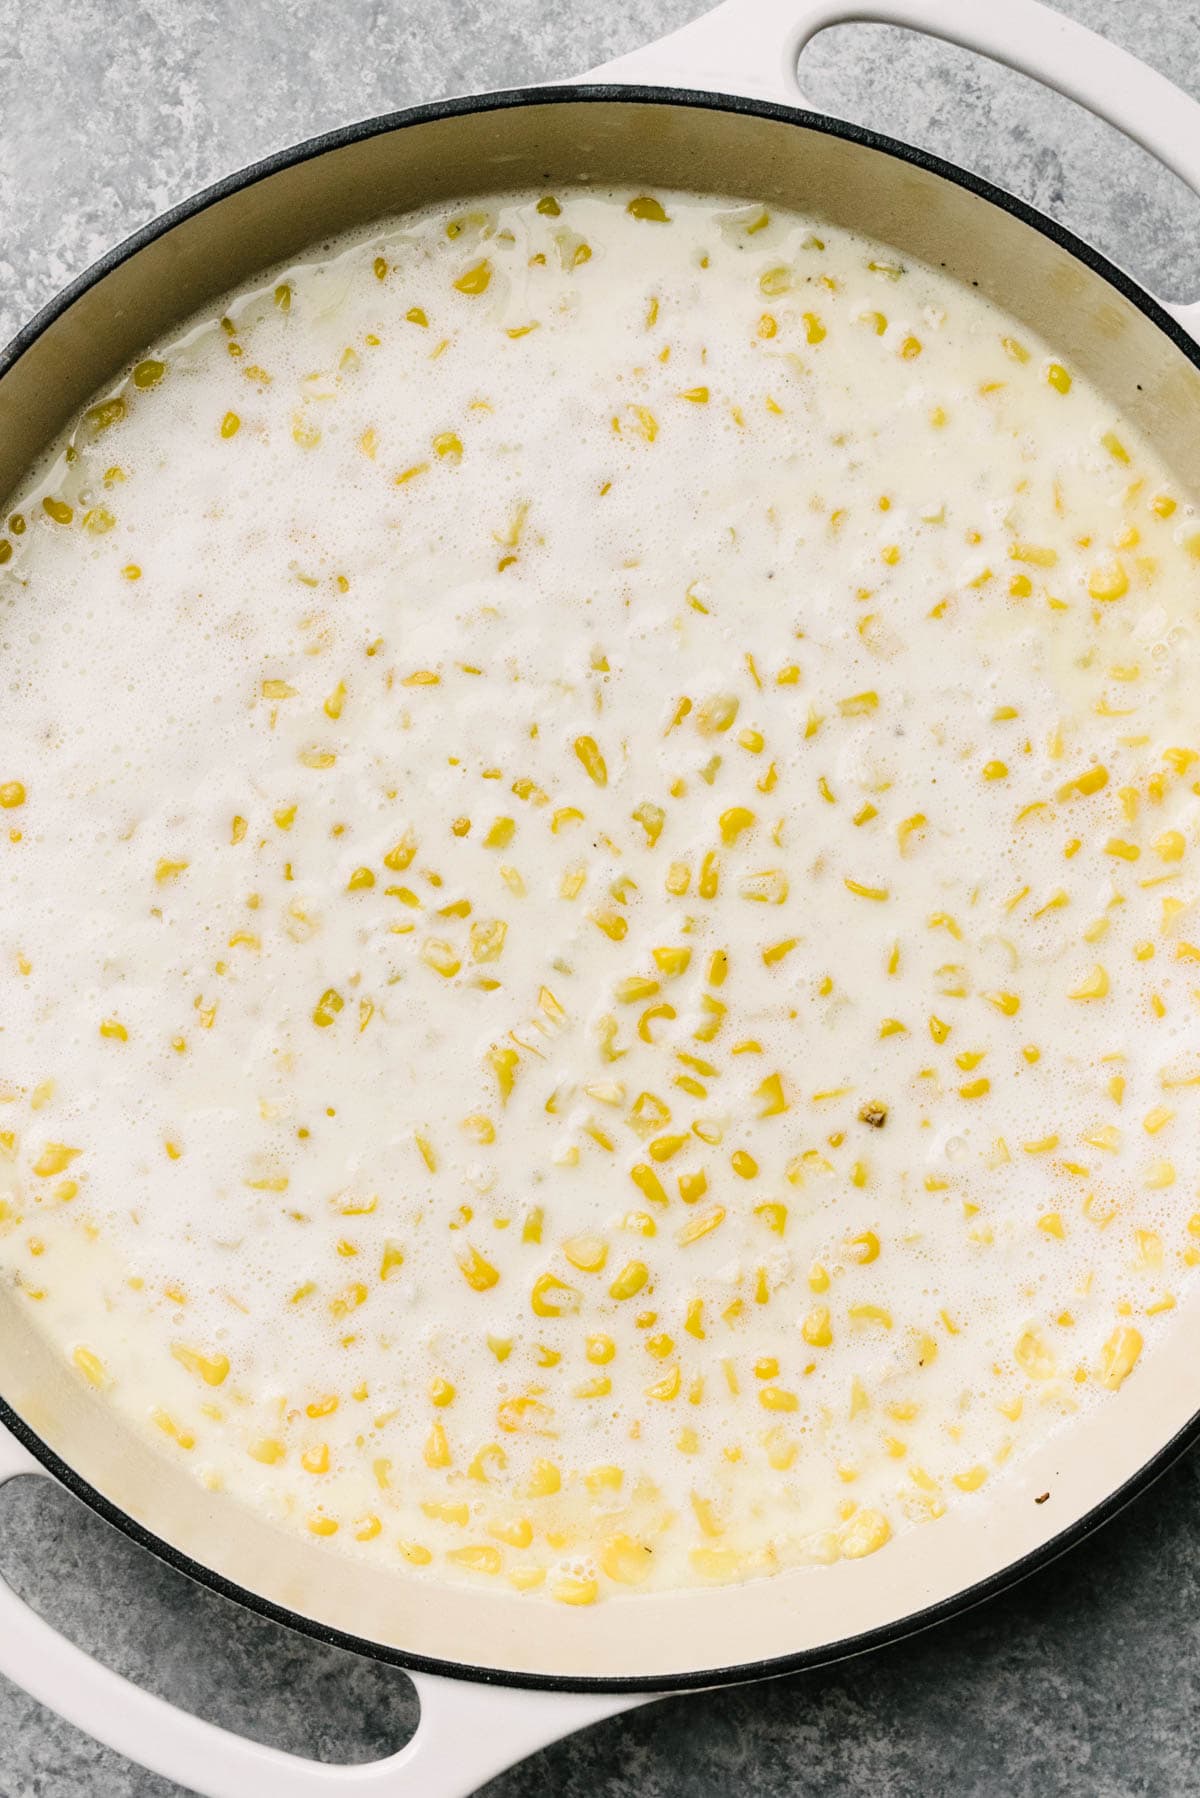 Corn kernels mixed with heavy cream, milk, flour, and sugar in a large grey enameled skillet.